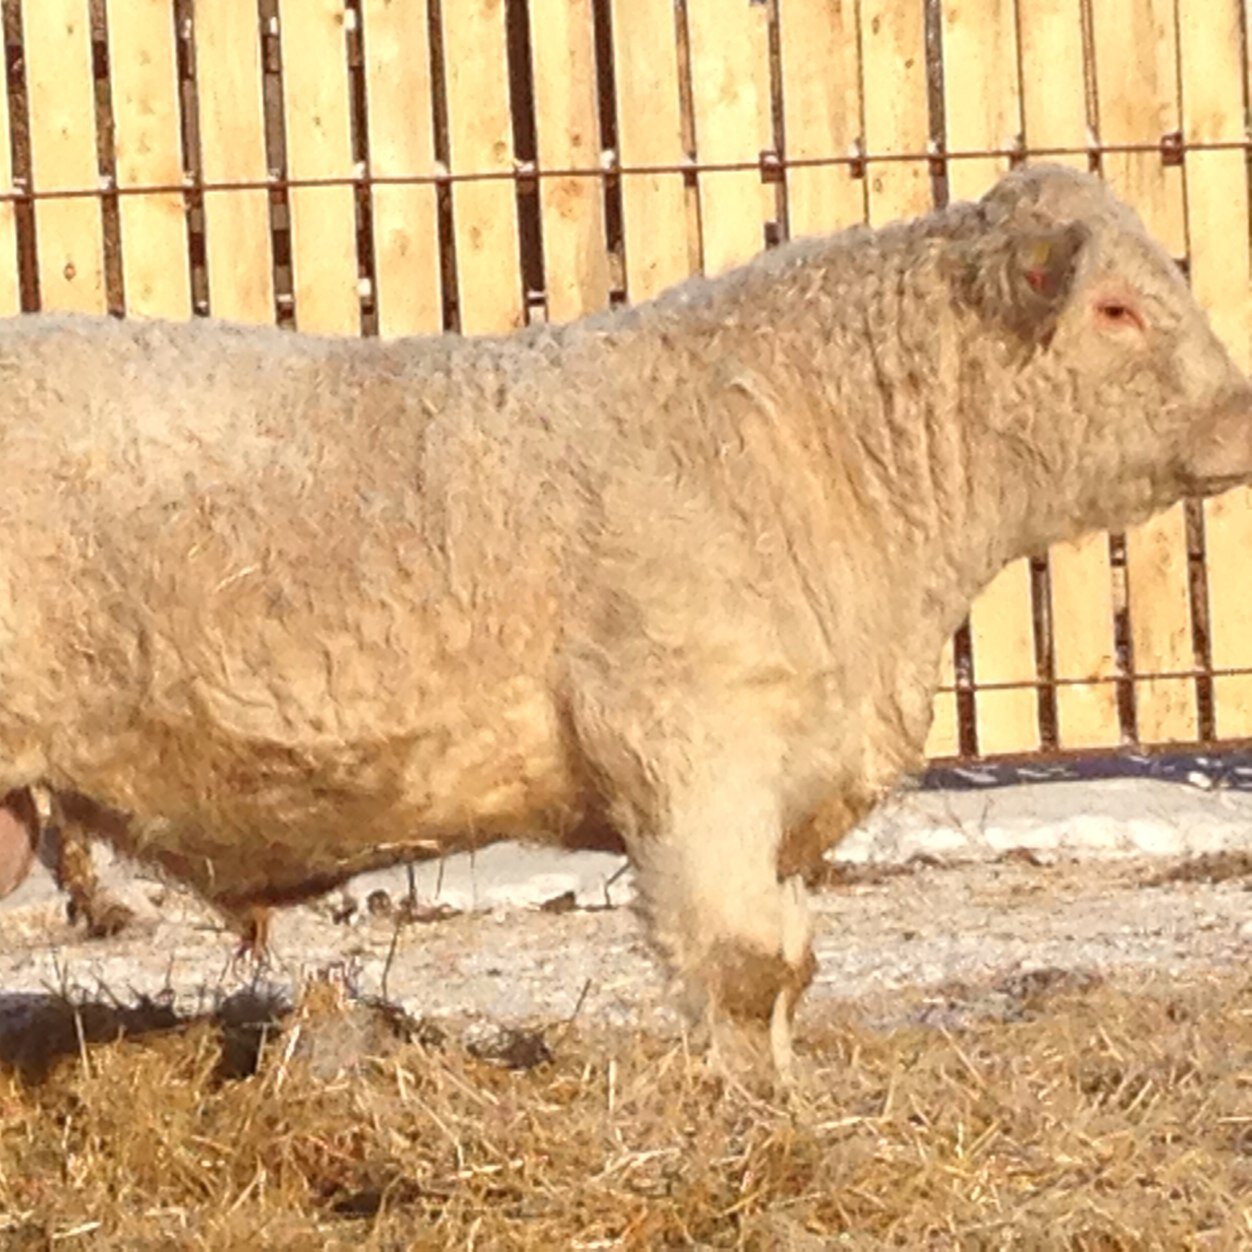 Hi, Iam Darren Odowichuk, 10 years into, but still considered new to the purebred charolais world, which is located in the Petlura, MB area.